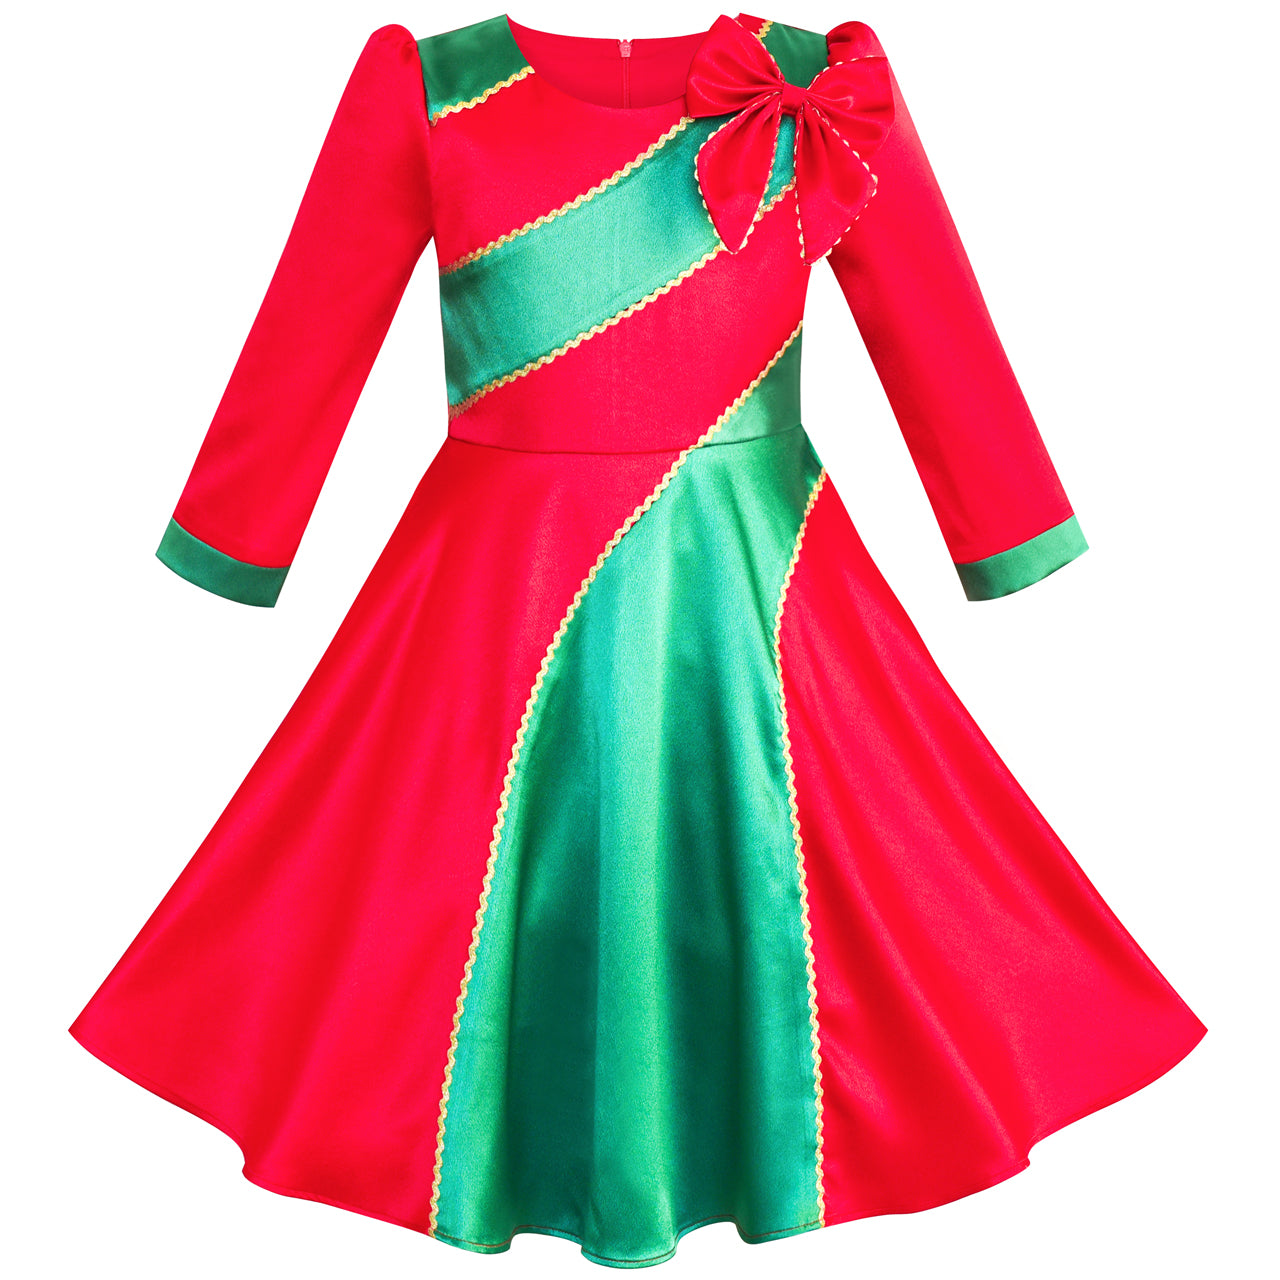 red and green christmas outfits